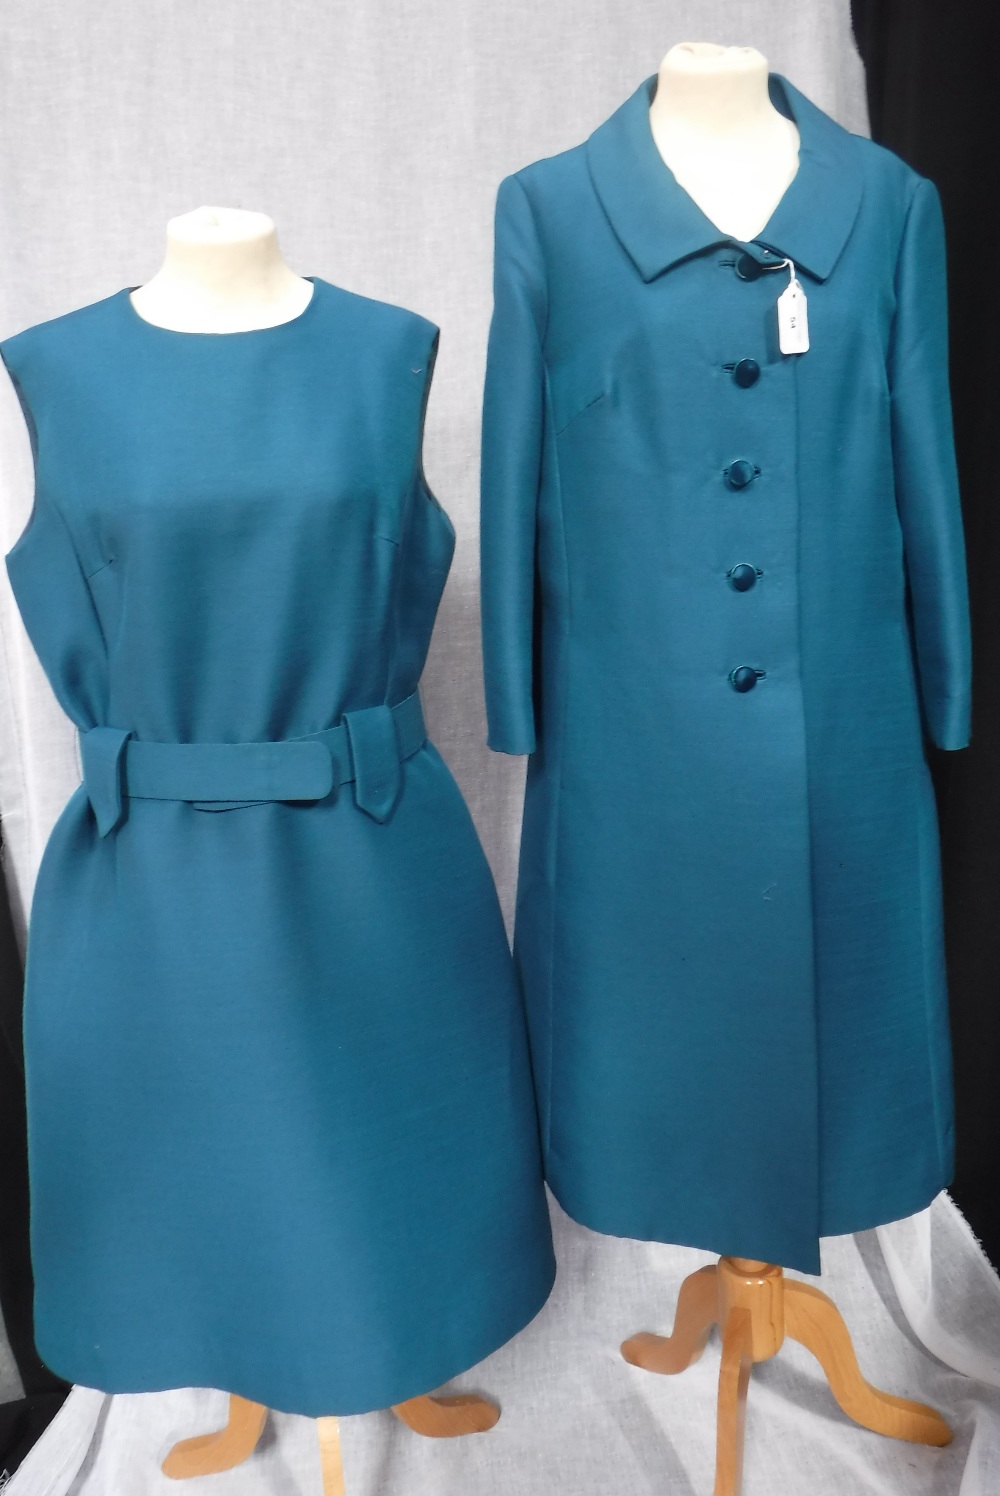 PETIT FRANCAISE; A LADIES VINTAGE 'TEAL' COLOURED DRESS: with matching 3/4 sleeved coat, circa